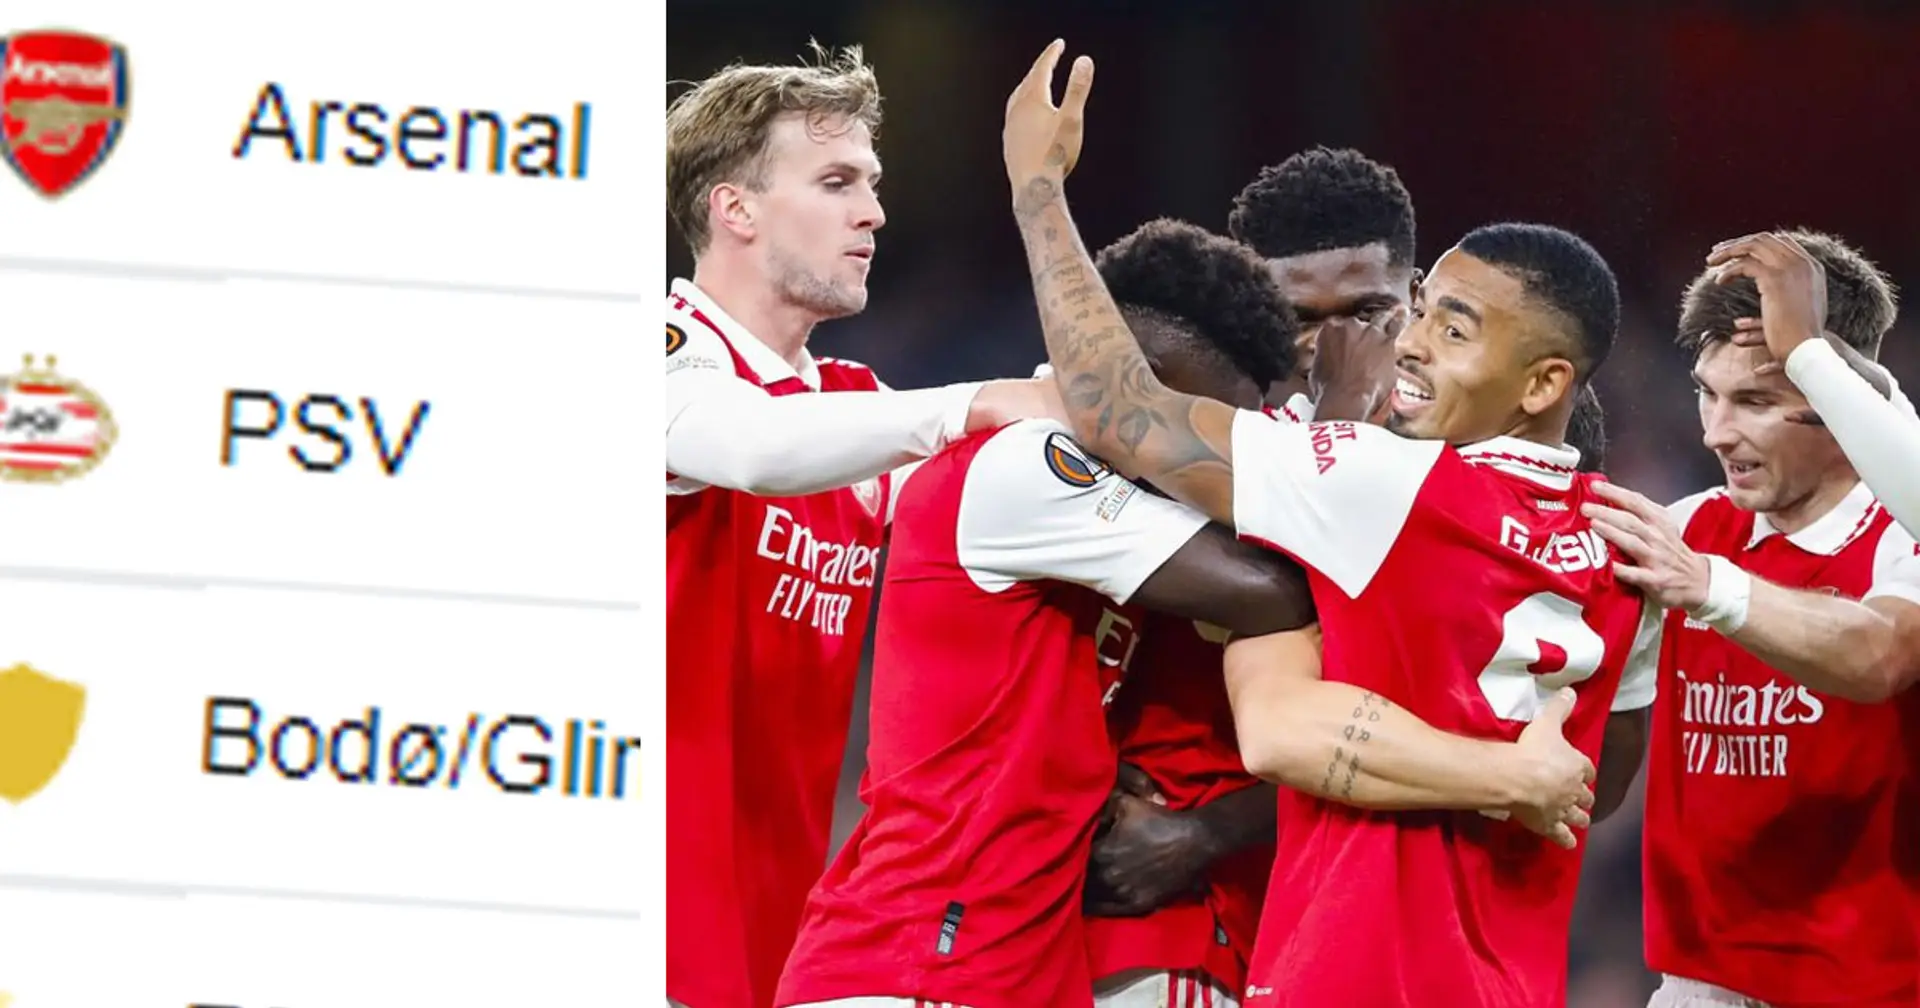 Arsenal qualify for Europa League knockouts with 2 games to spare – group table revealed